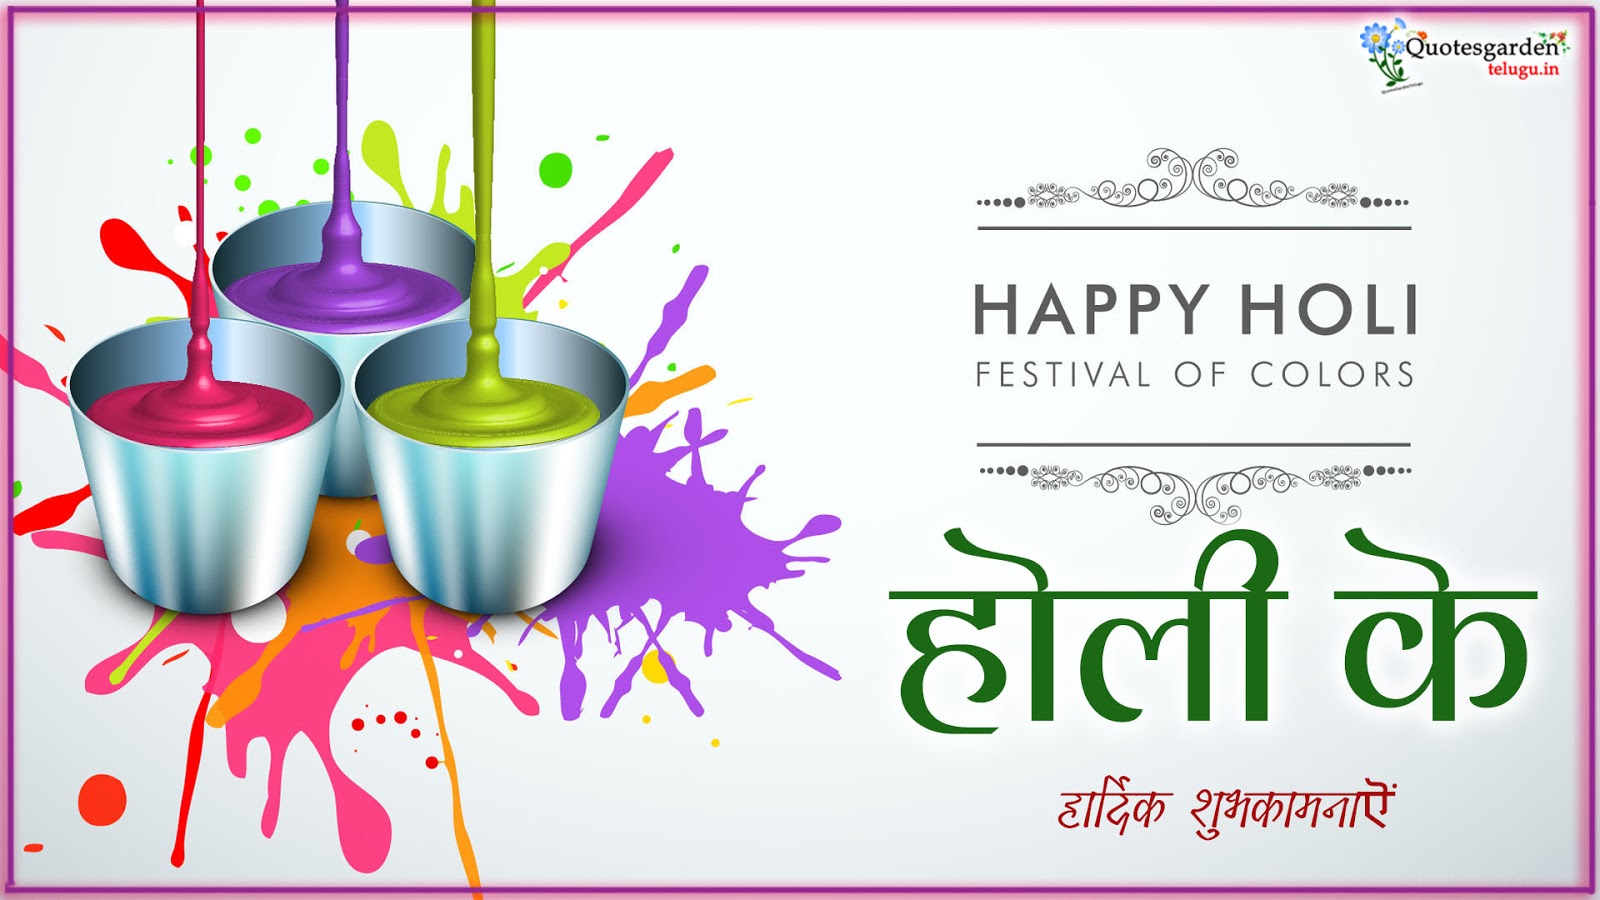 Best of Holi hindi messages wishes - Holi Wishes messages images ...